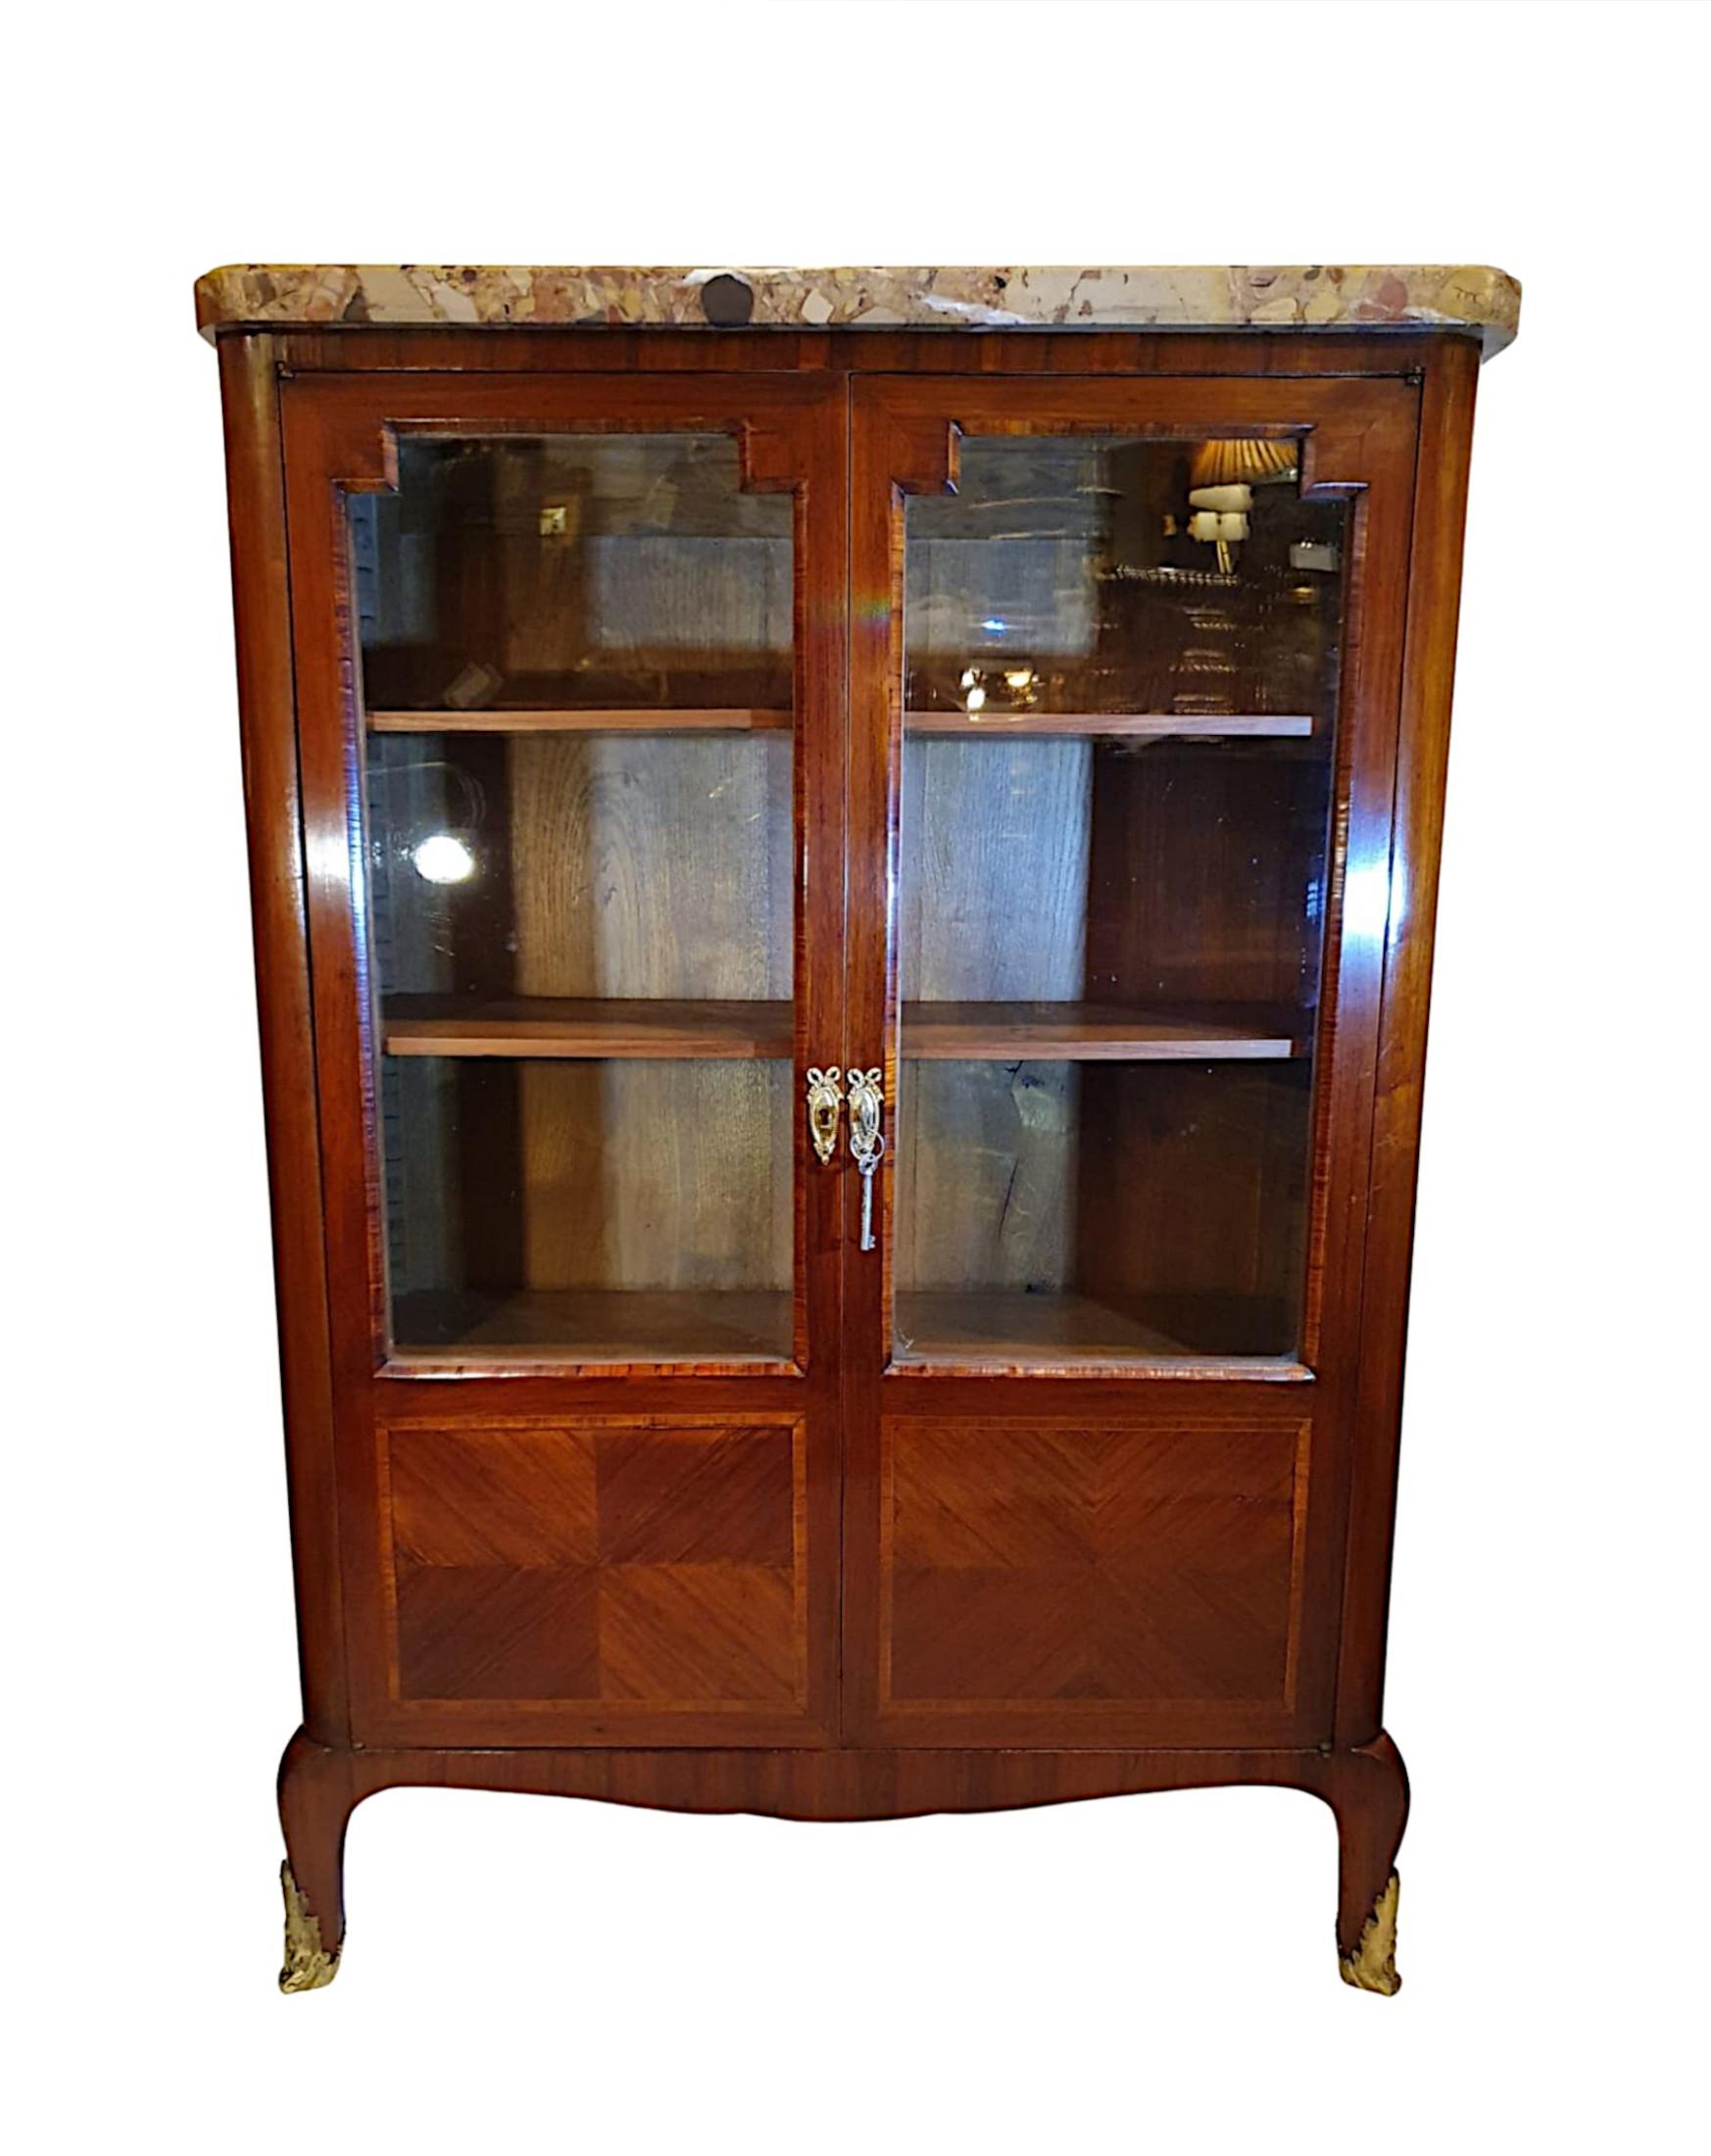 A very fine and rare pair of 19th century French marble top crossbanded kingwood and fruitwood bookcases. The moulded breche d’alep marble top of rectangular form raised over two panelled glazed doors with decorative brass escutcheons opening to a